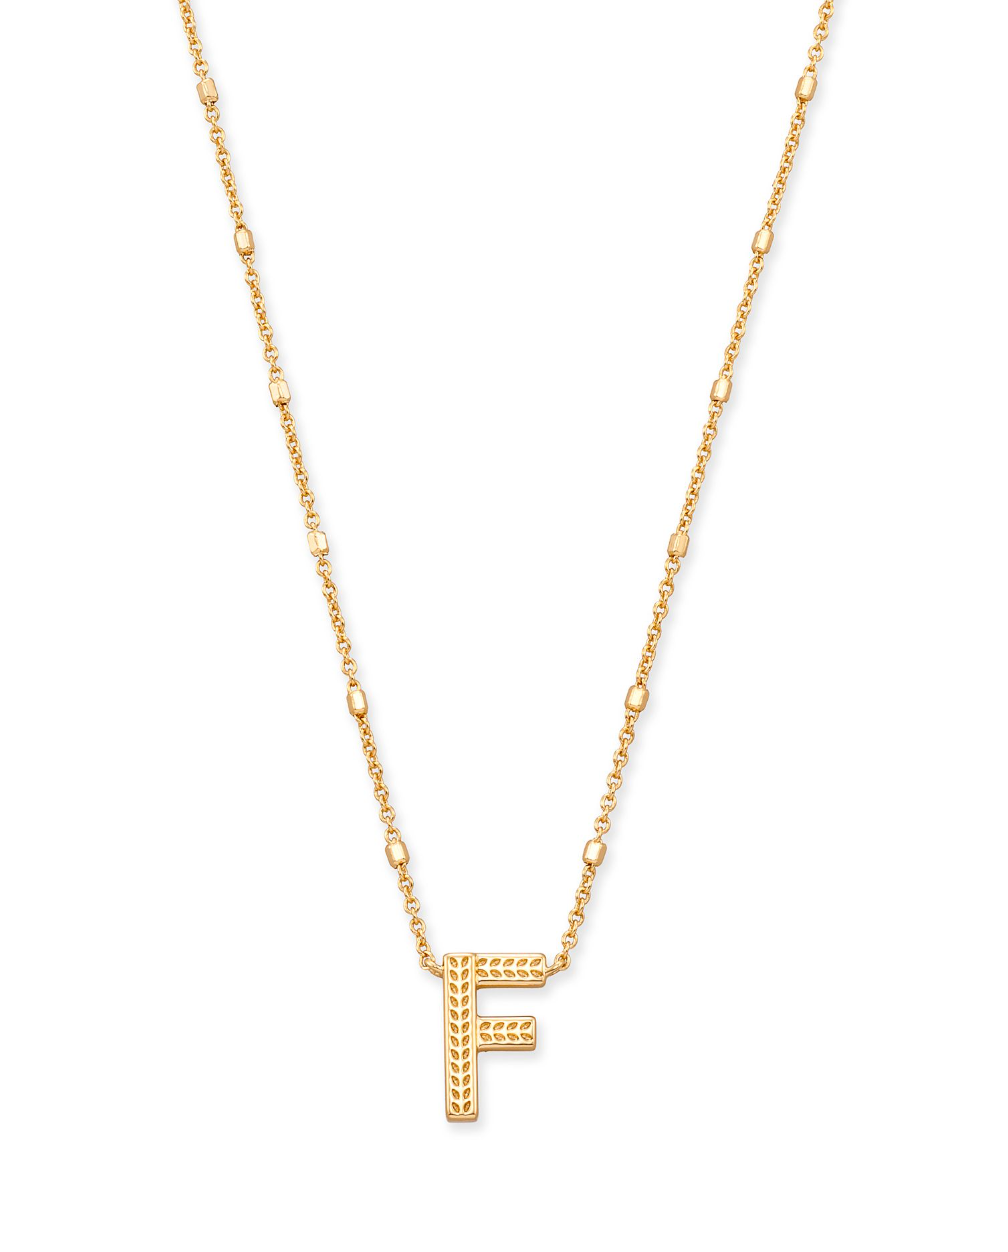 Letter F Pendant Necklace in Gold - Kendra Scott